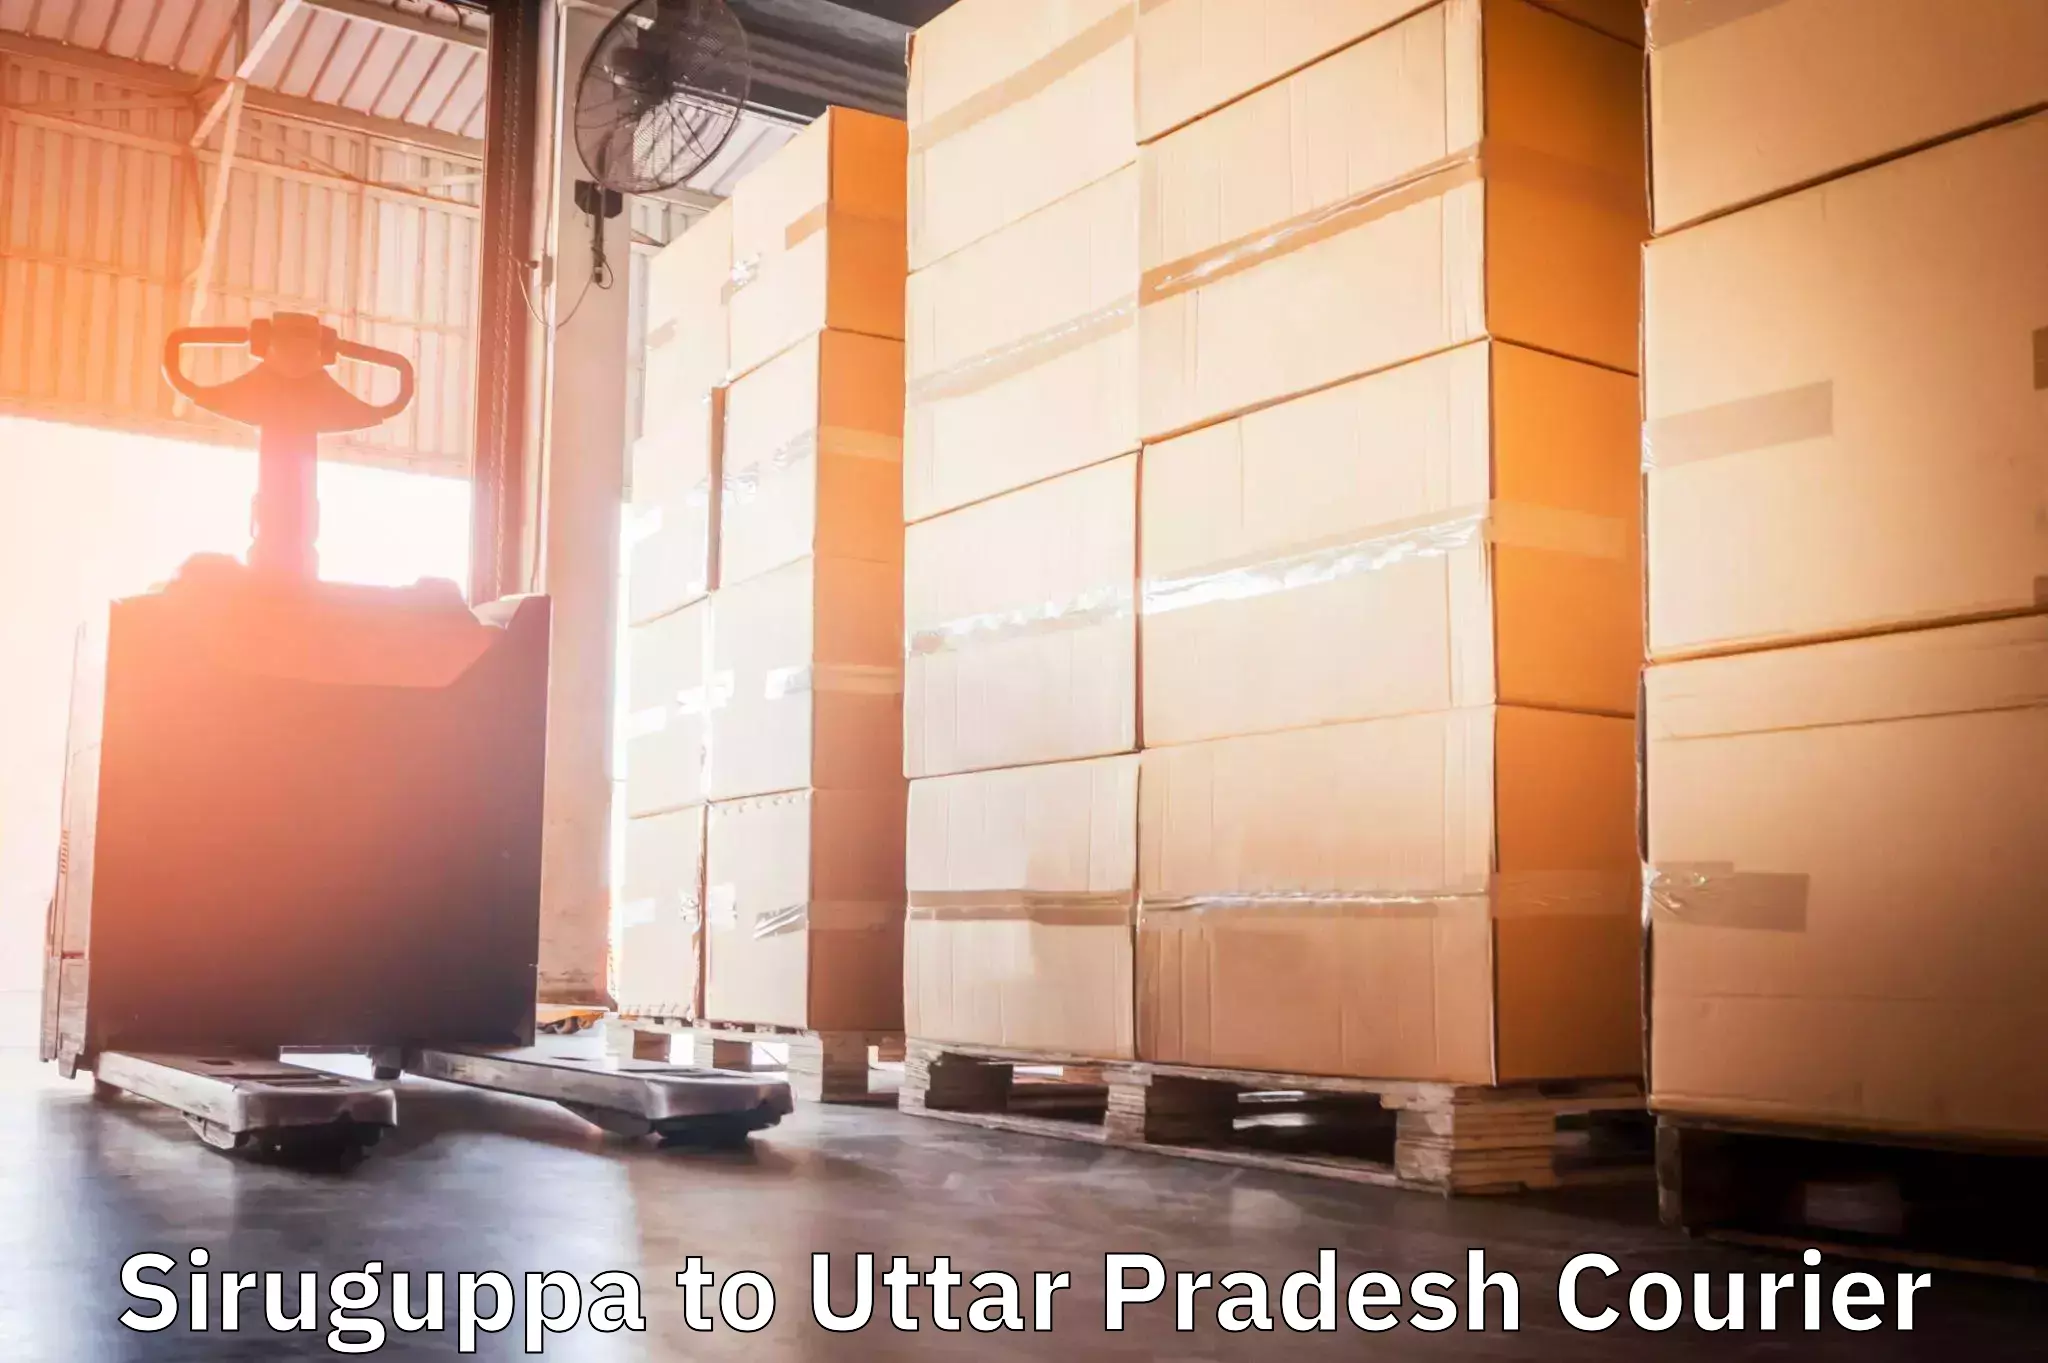 Custom courier packaging Siruguppa to Fatehabad Agra